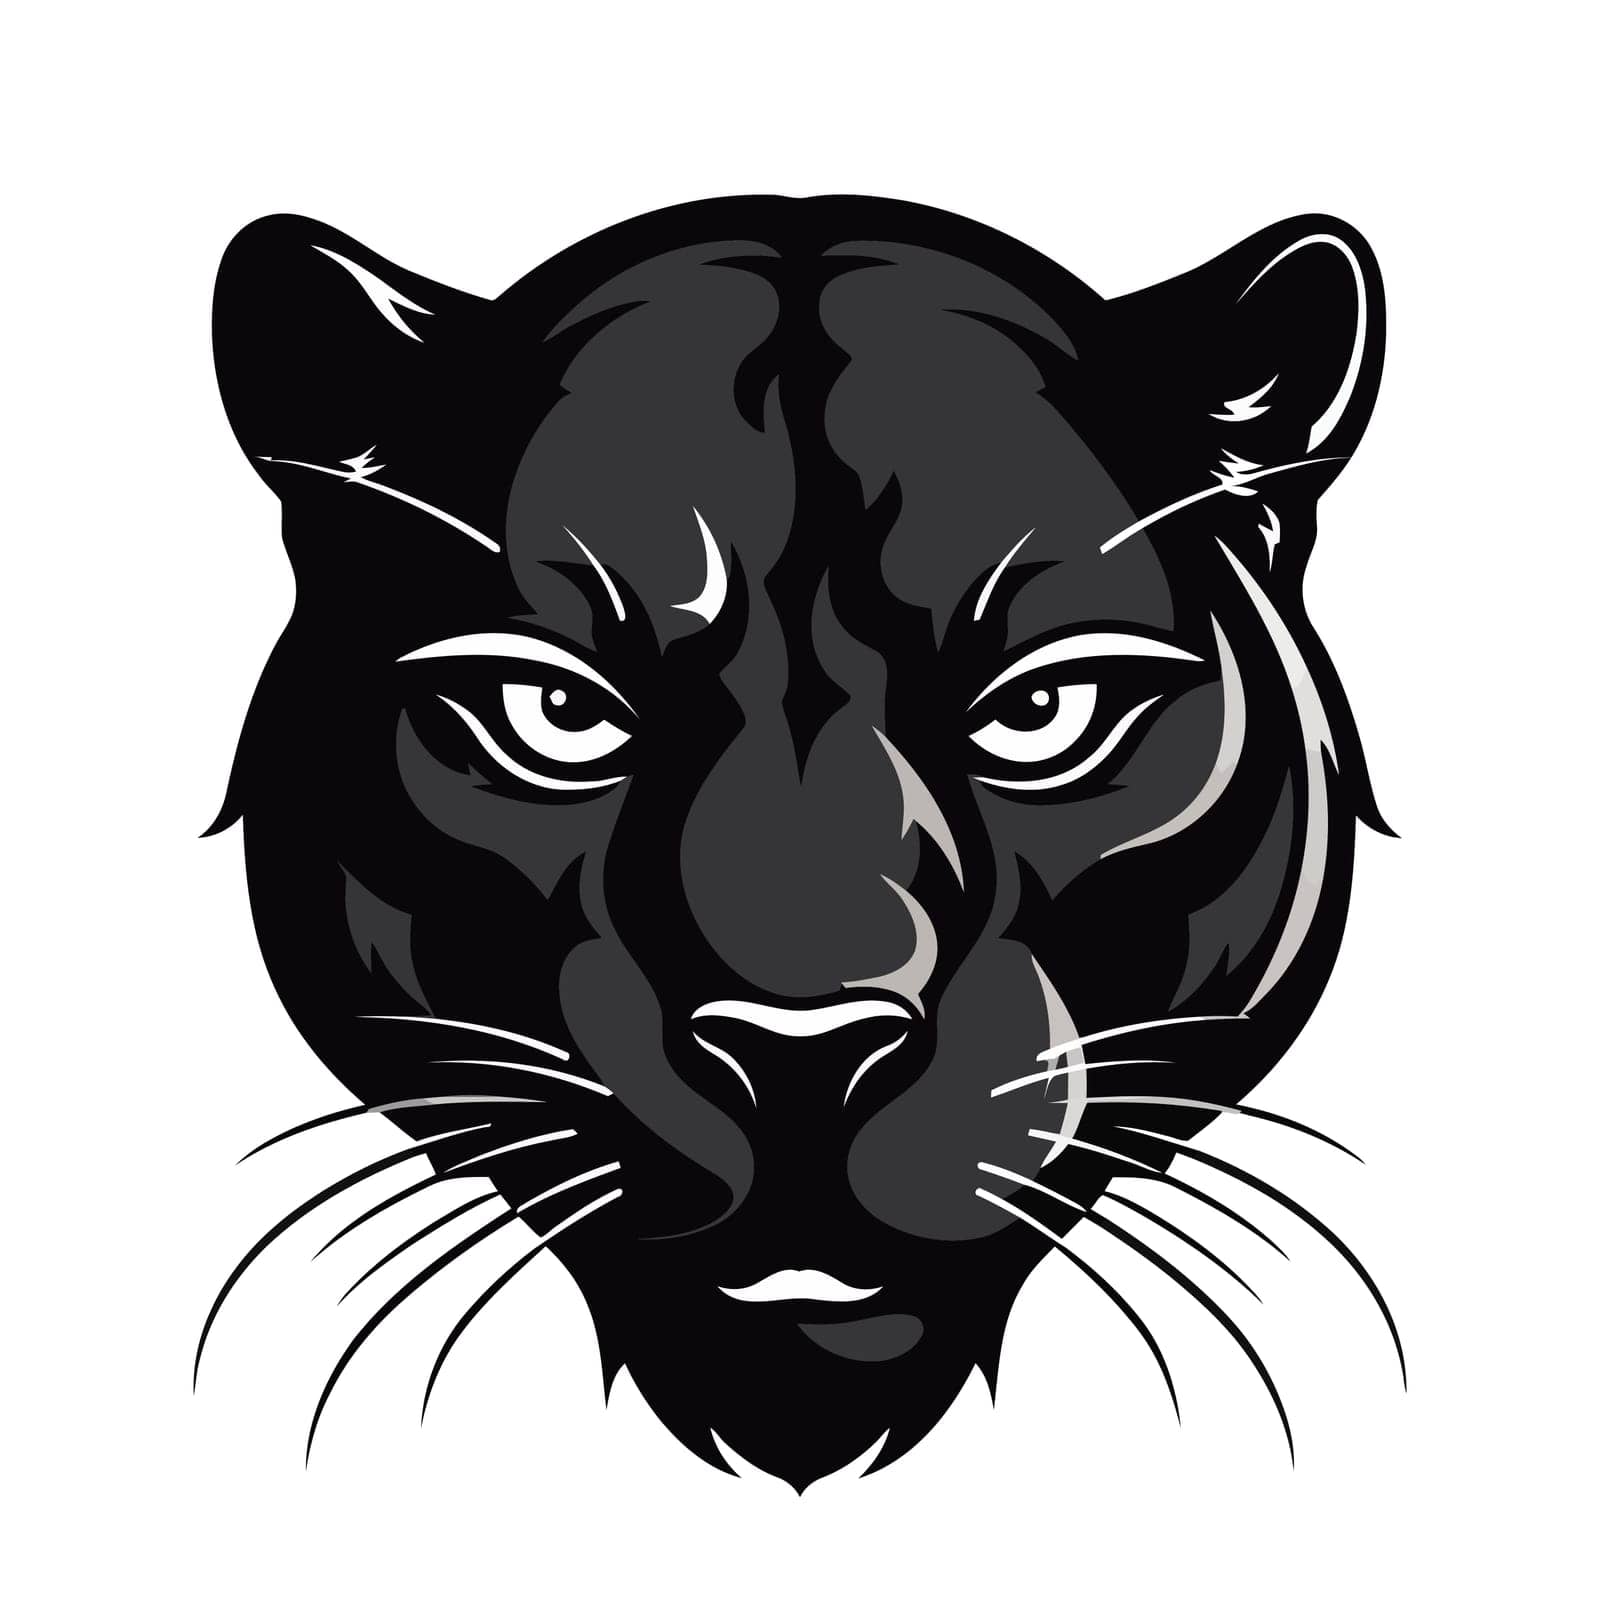 Panther head logo design. Abstract drawing panther face. Cute panther face by Chekman